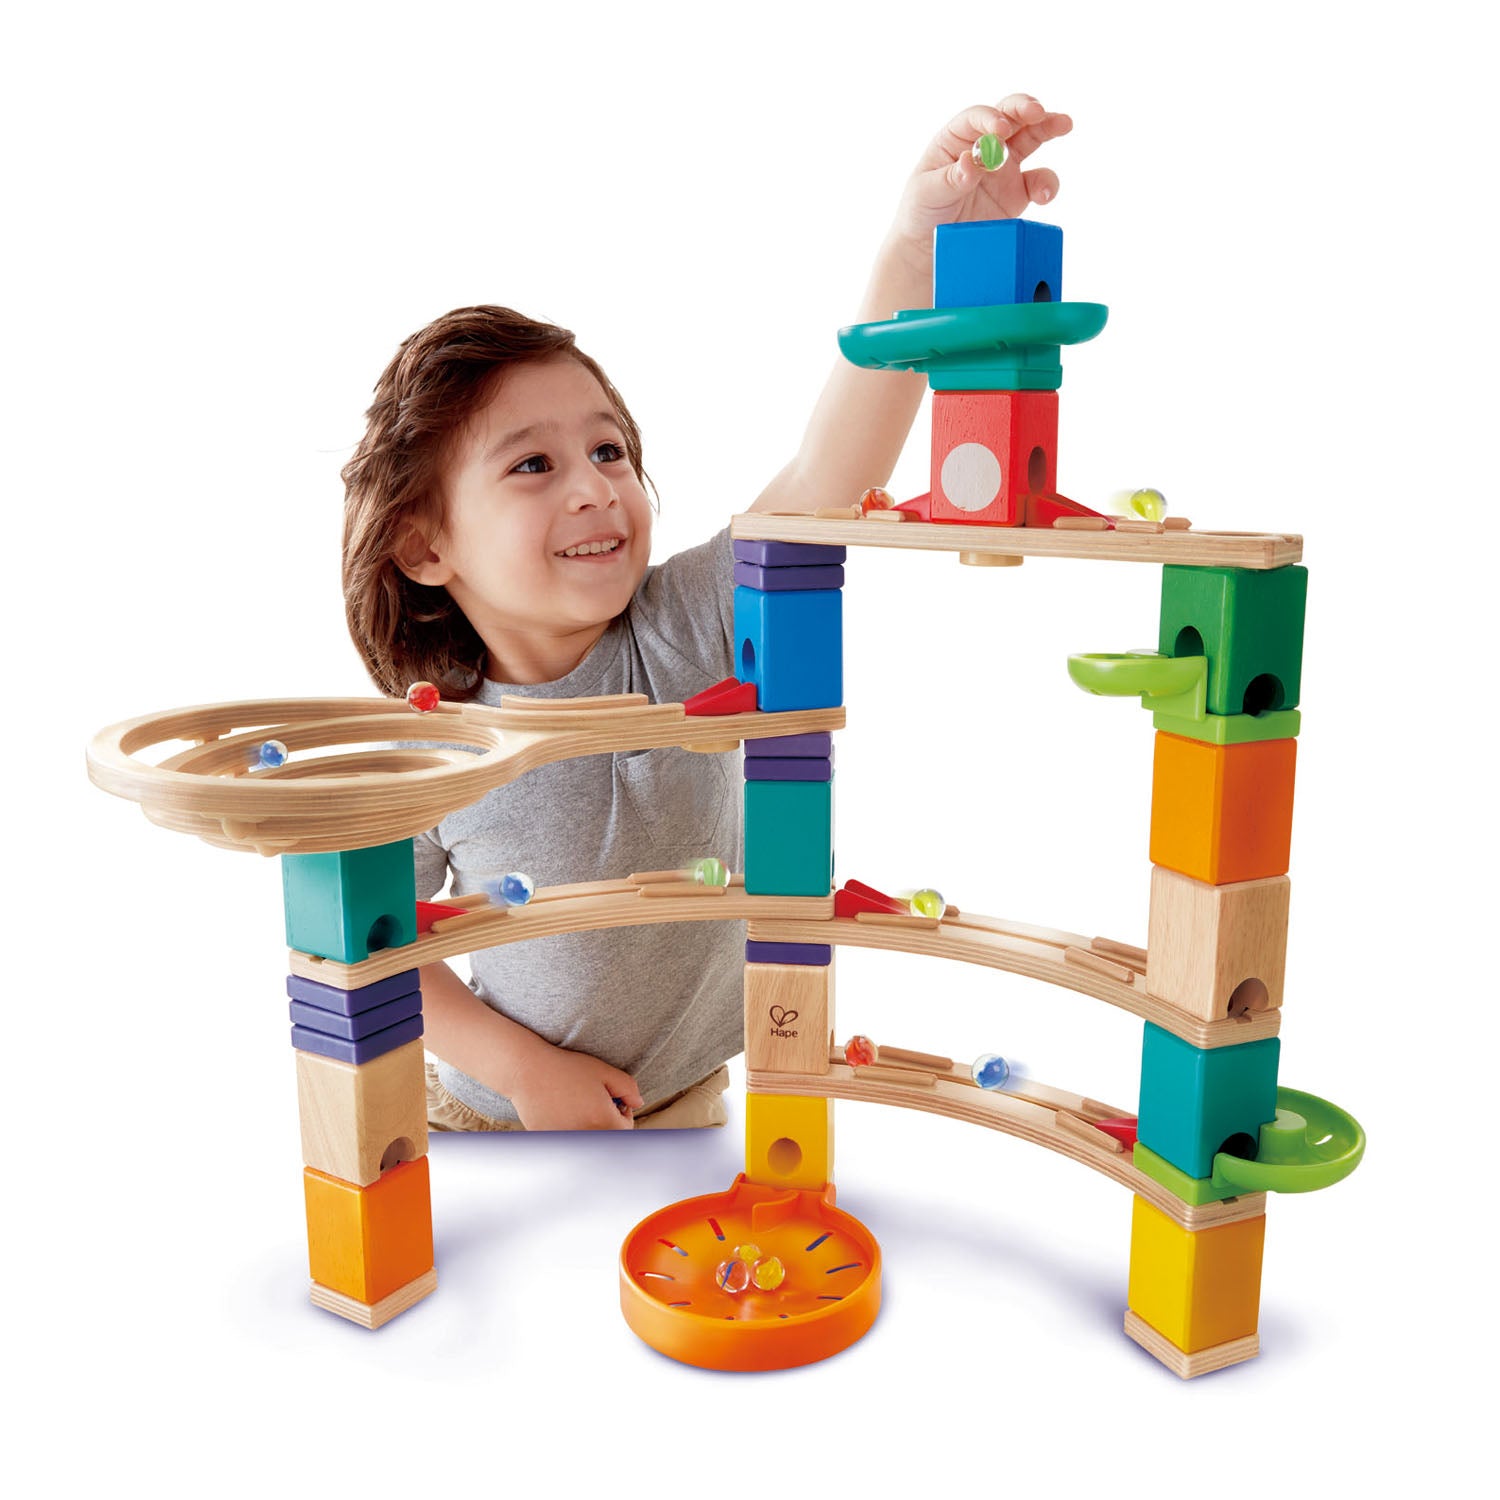 Hape QuadrillaCliffhanger wooden marble run, contruction and STEAM play The Toy Wagon